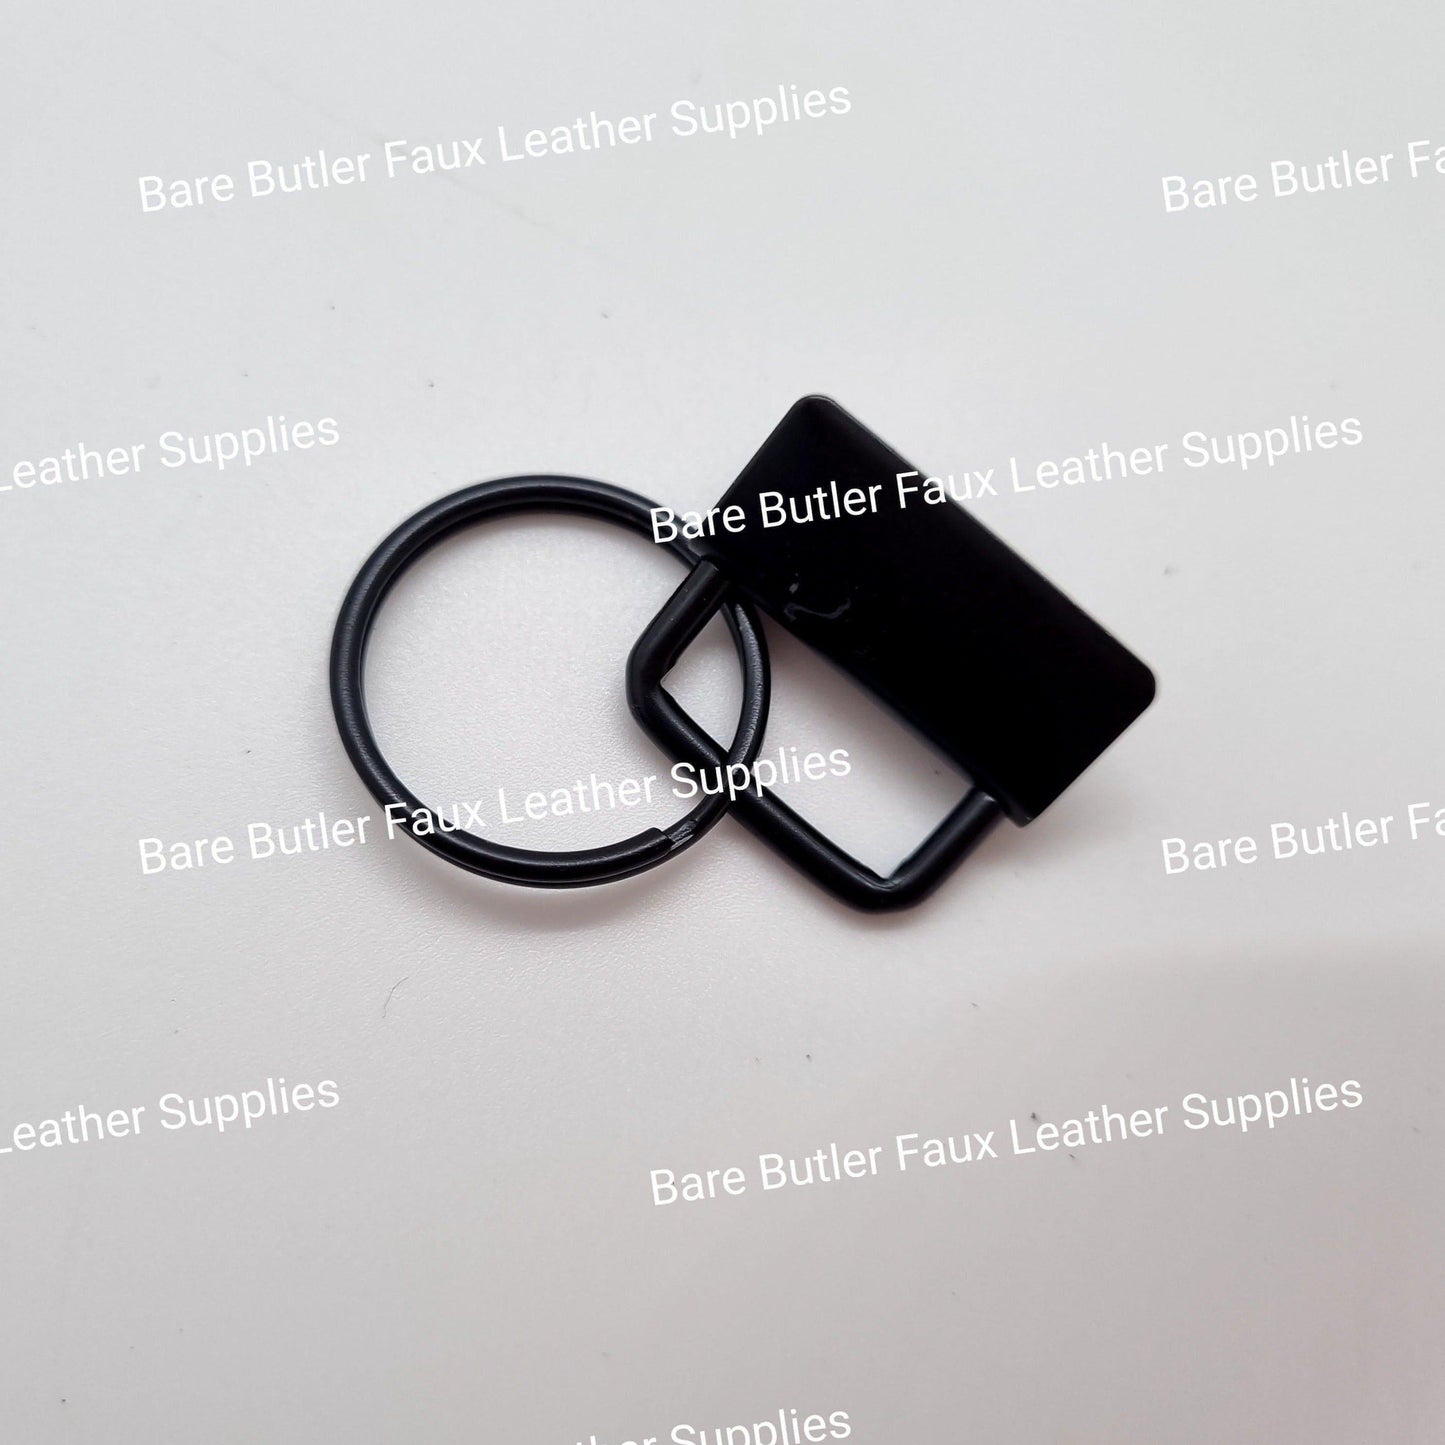 Key Fob Hardware - hardware, key fob - Bare Butler Faux Leather Supplies 